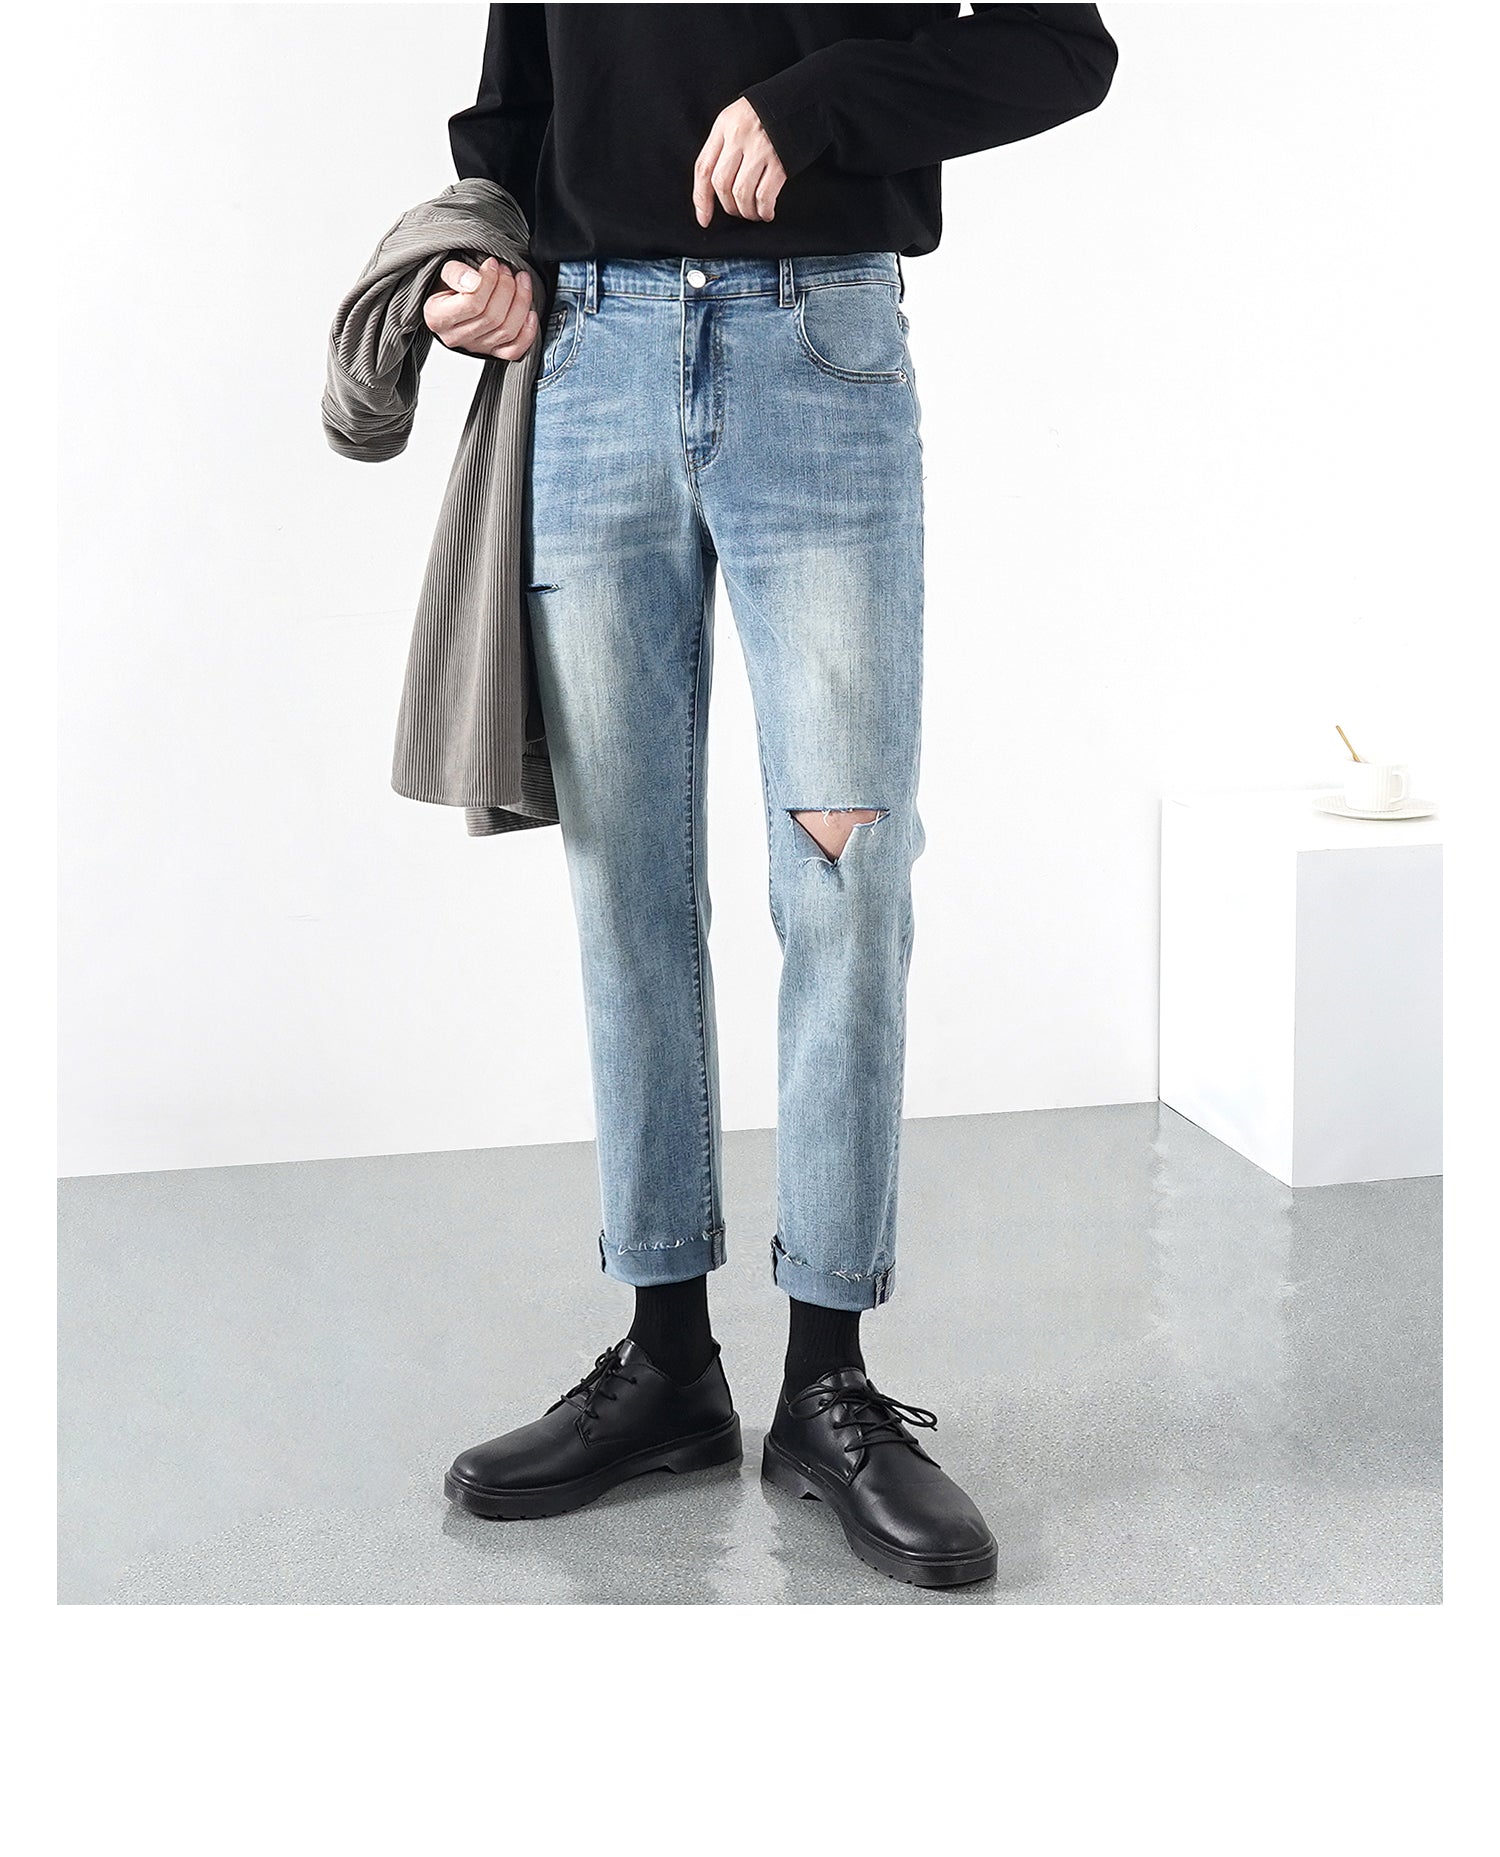 Ripped Jeans For Men-Deluxe Fashion Forever